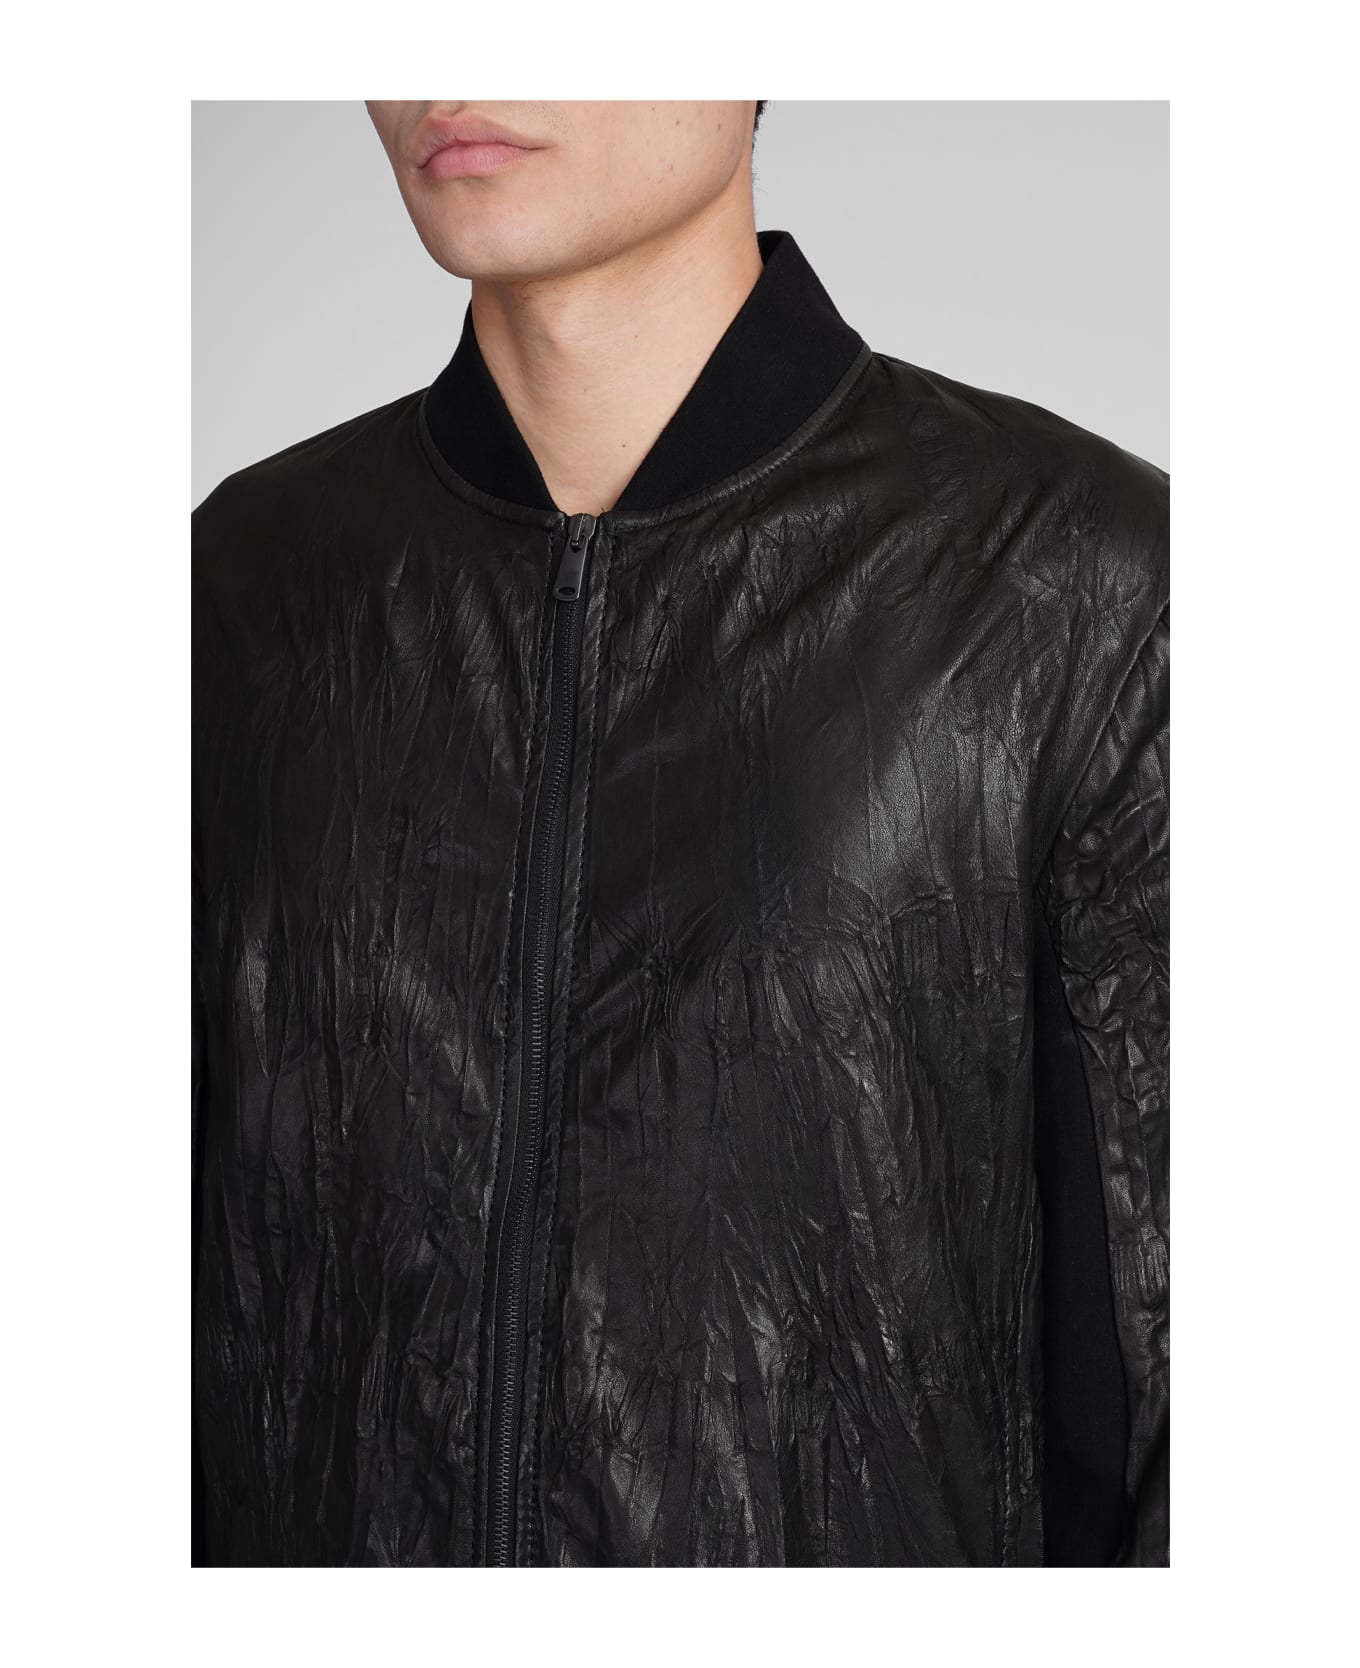 Transit Bomber In Black Leather And Fabric - black ジャケット